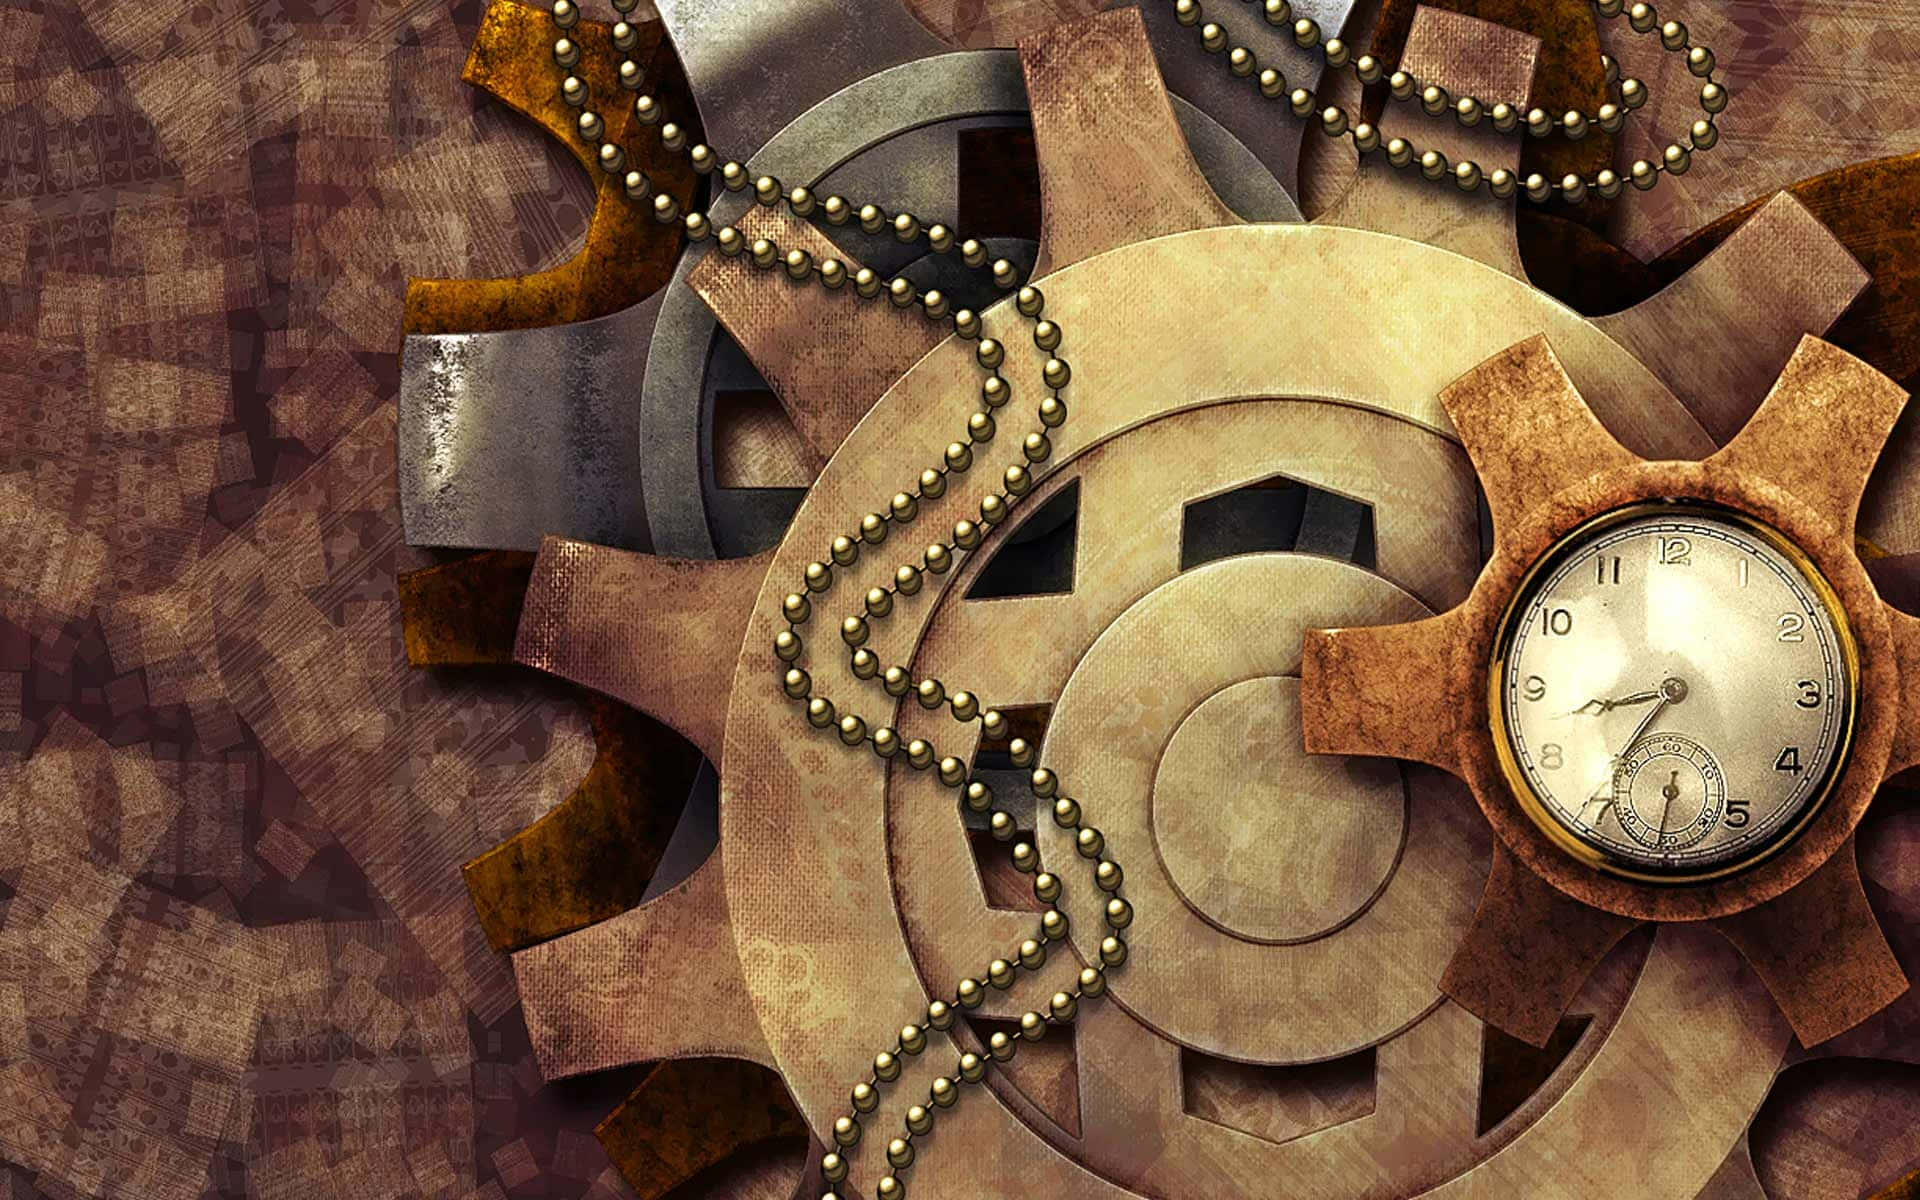 Immerse yourself in the fascinatingly complex world of steampunk